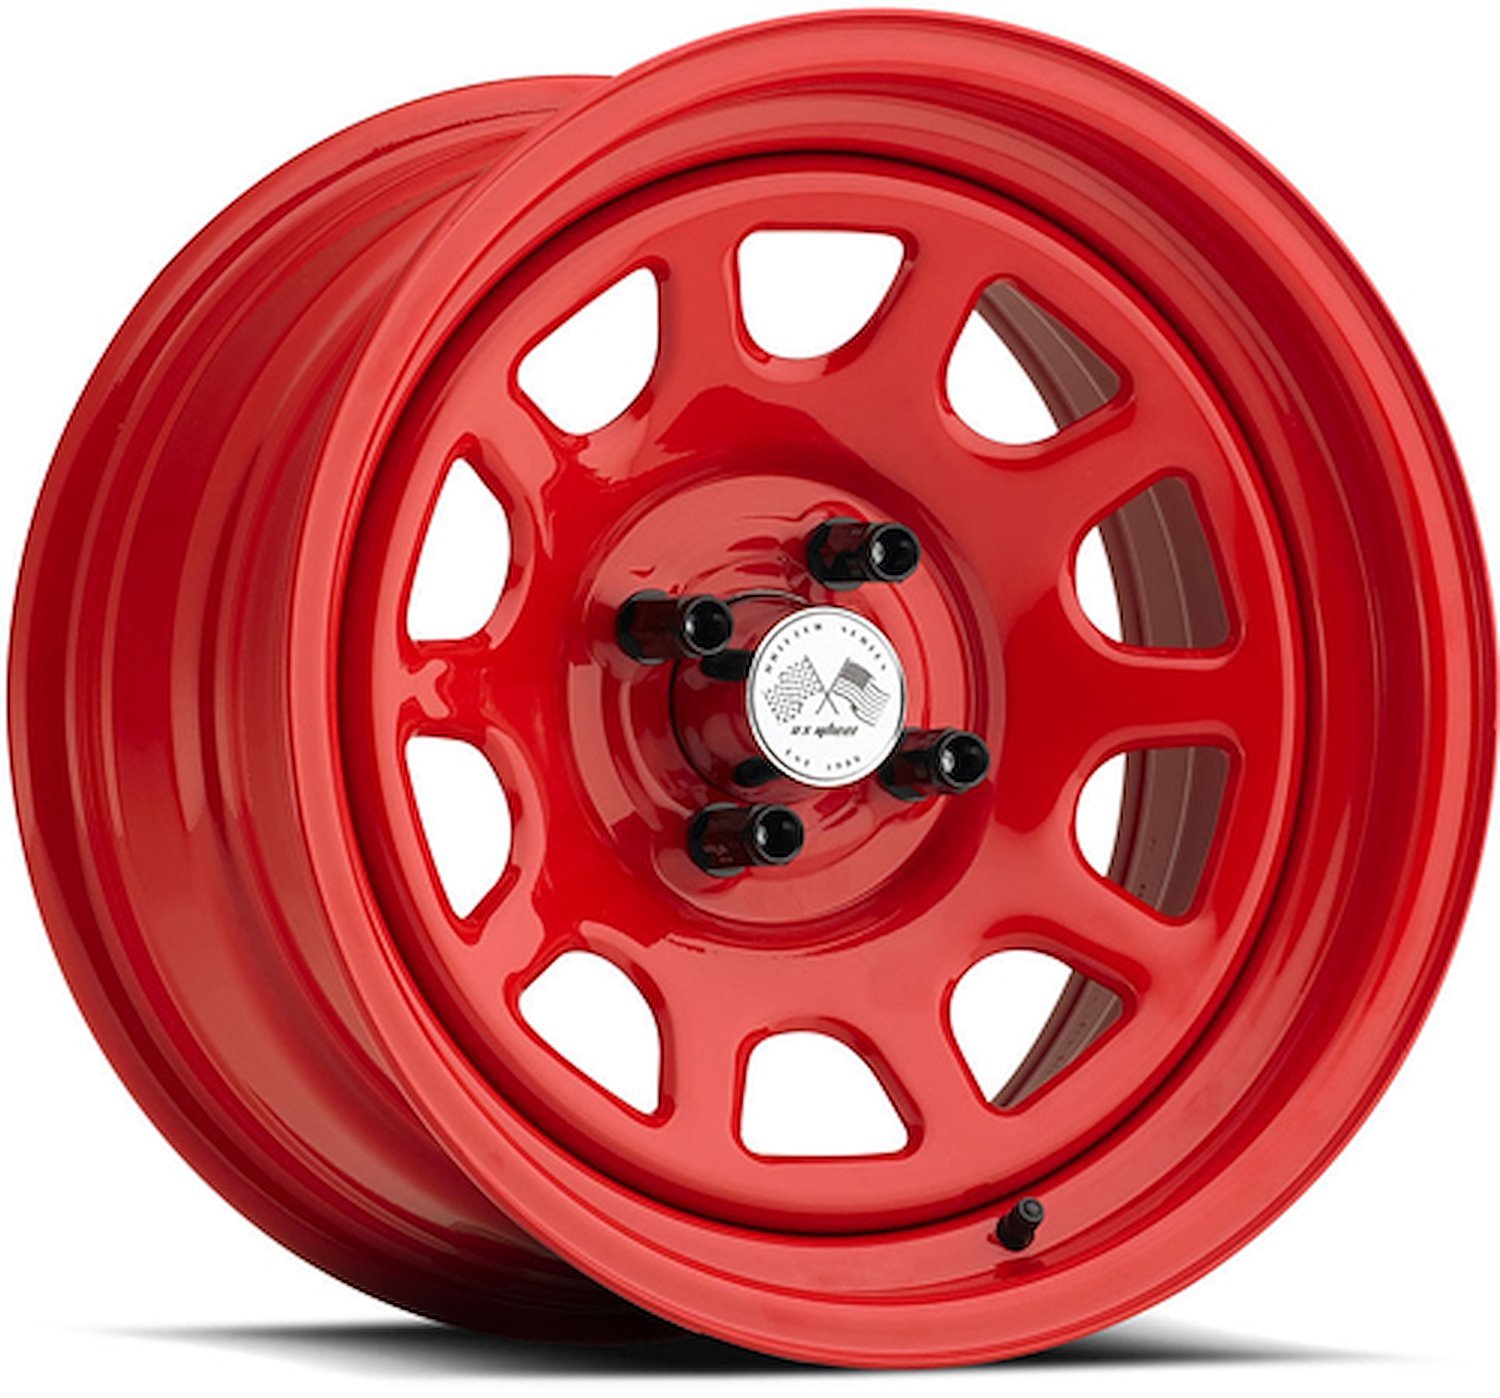 PAINTED DAYTONA FWD DRIFTER RED 16 x 10 4 x 45 Bolt Circle 5 12 Back Spacing 0 offset 266 Center Bore 1400 lbs Load Rating